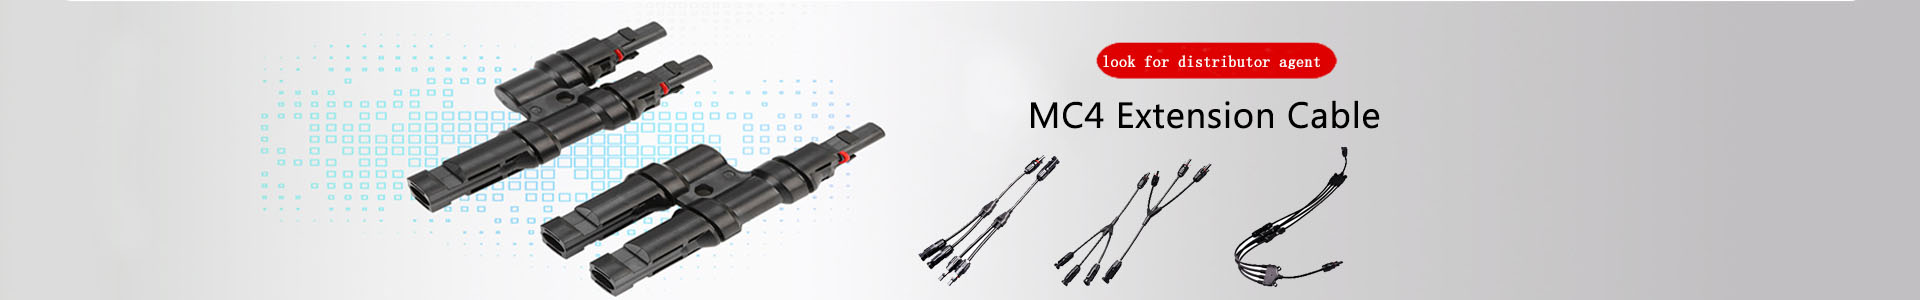 Company news | Handwe Group-Solar | solar connector,solar branch connector,diode fuse connector,MC4 extnsion cable,H1Z2Z2 solar cable, UL4703 solar cable | Leading manufacturer and supplier of solar pv cables and connectors